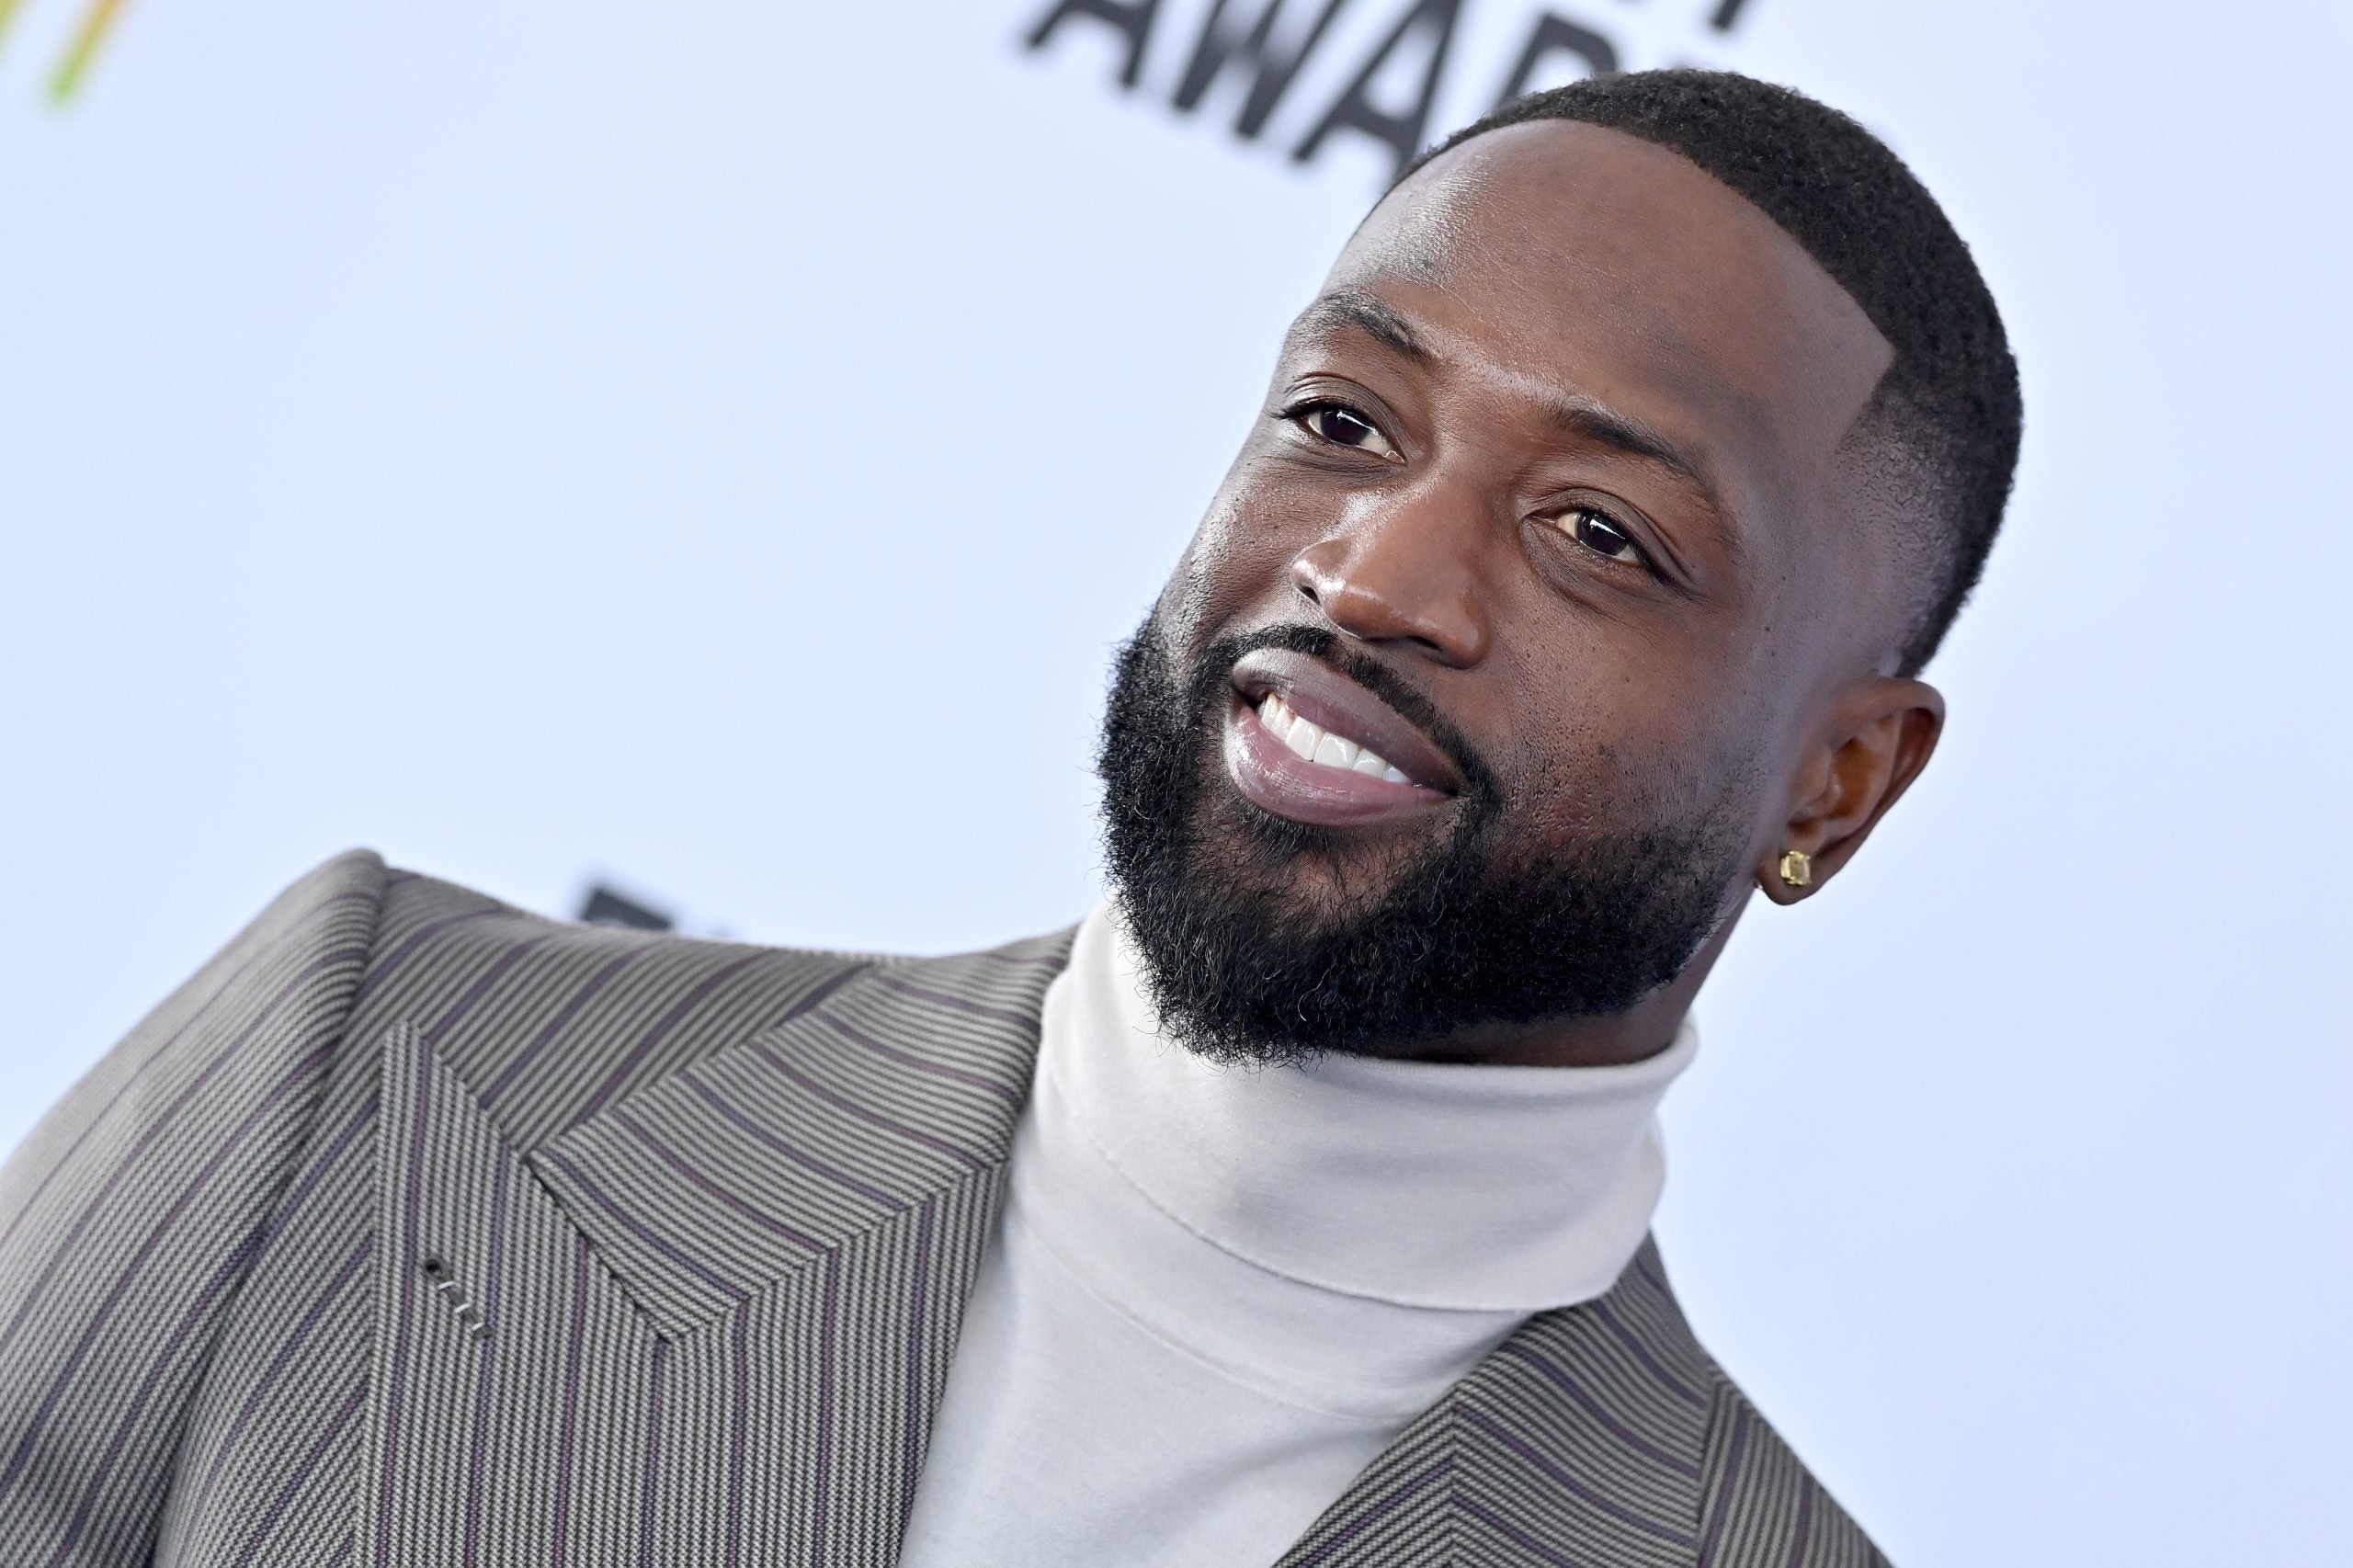 Dwyane Wade On Women’s Sports, His Hall Of Fame Induction And Season Two Of ‘The Cube’ On TBS